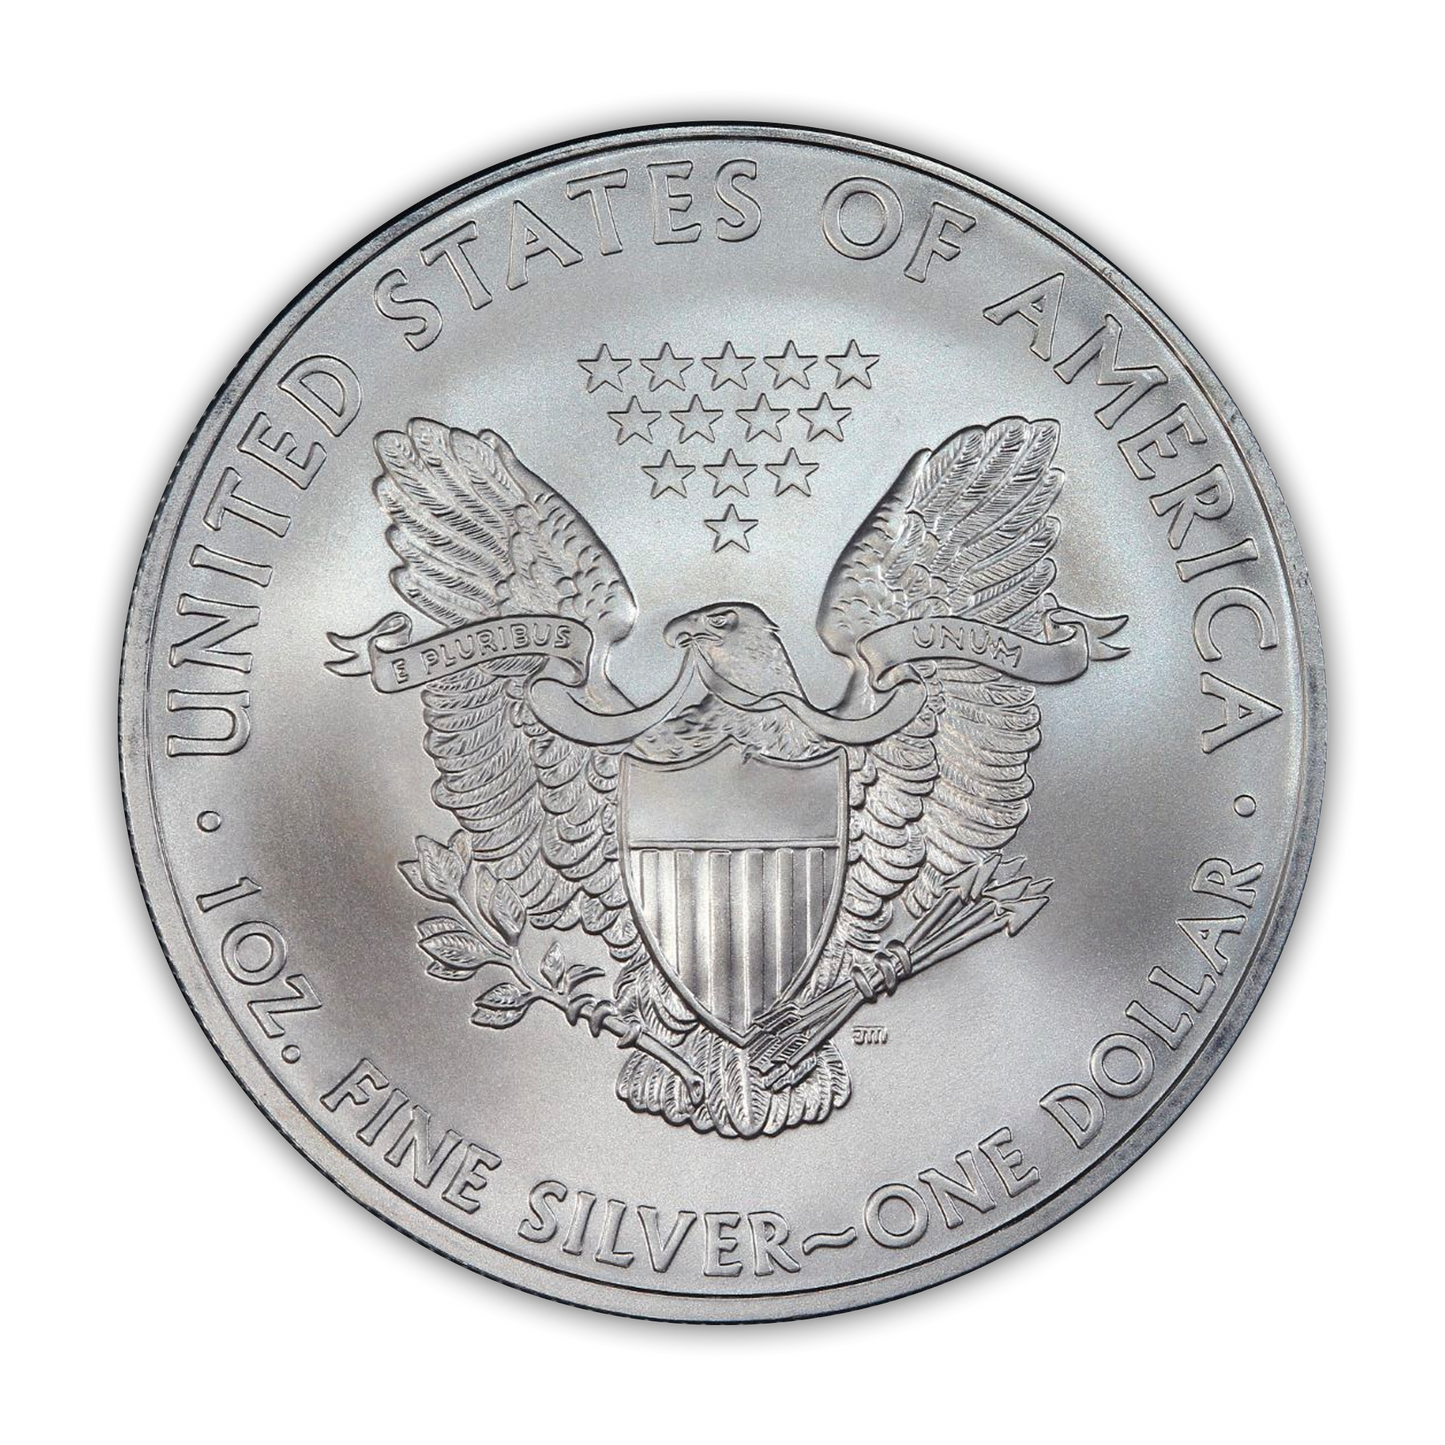 2009 Silver Eagle - Business Strike - Uncirculated - CoinsTV